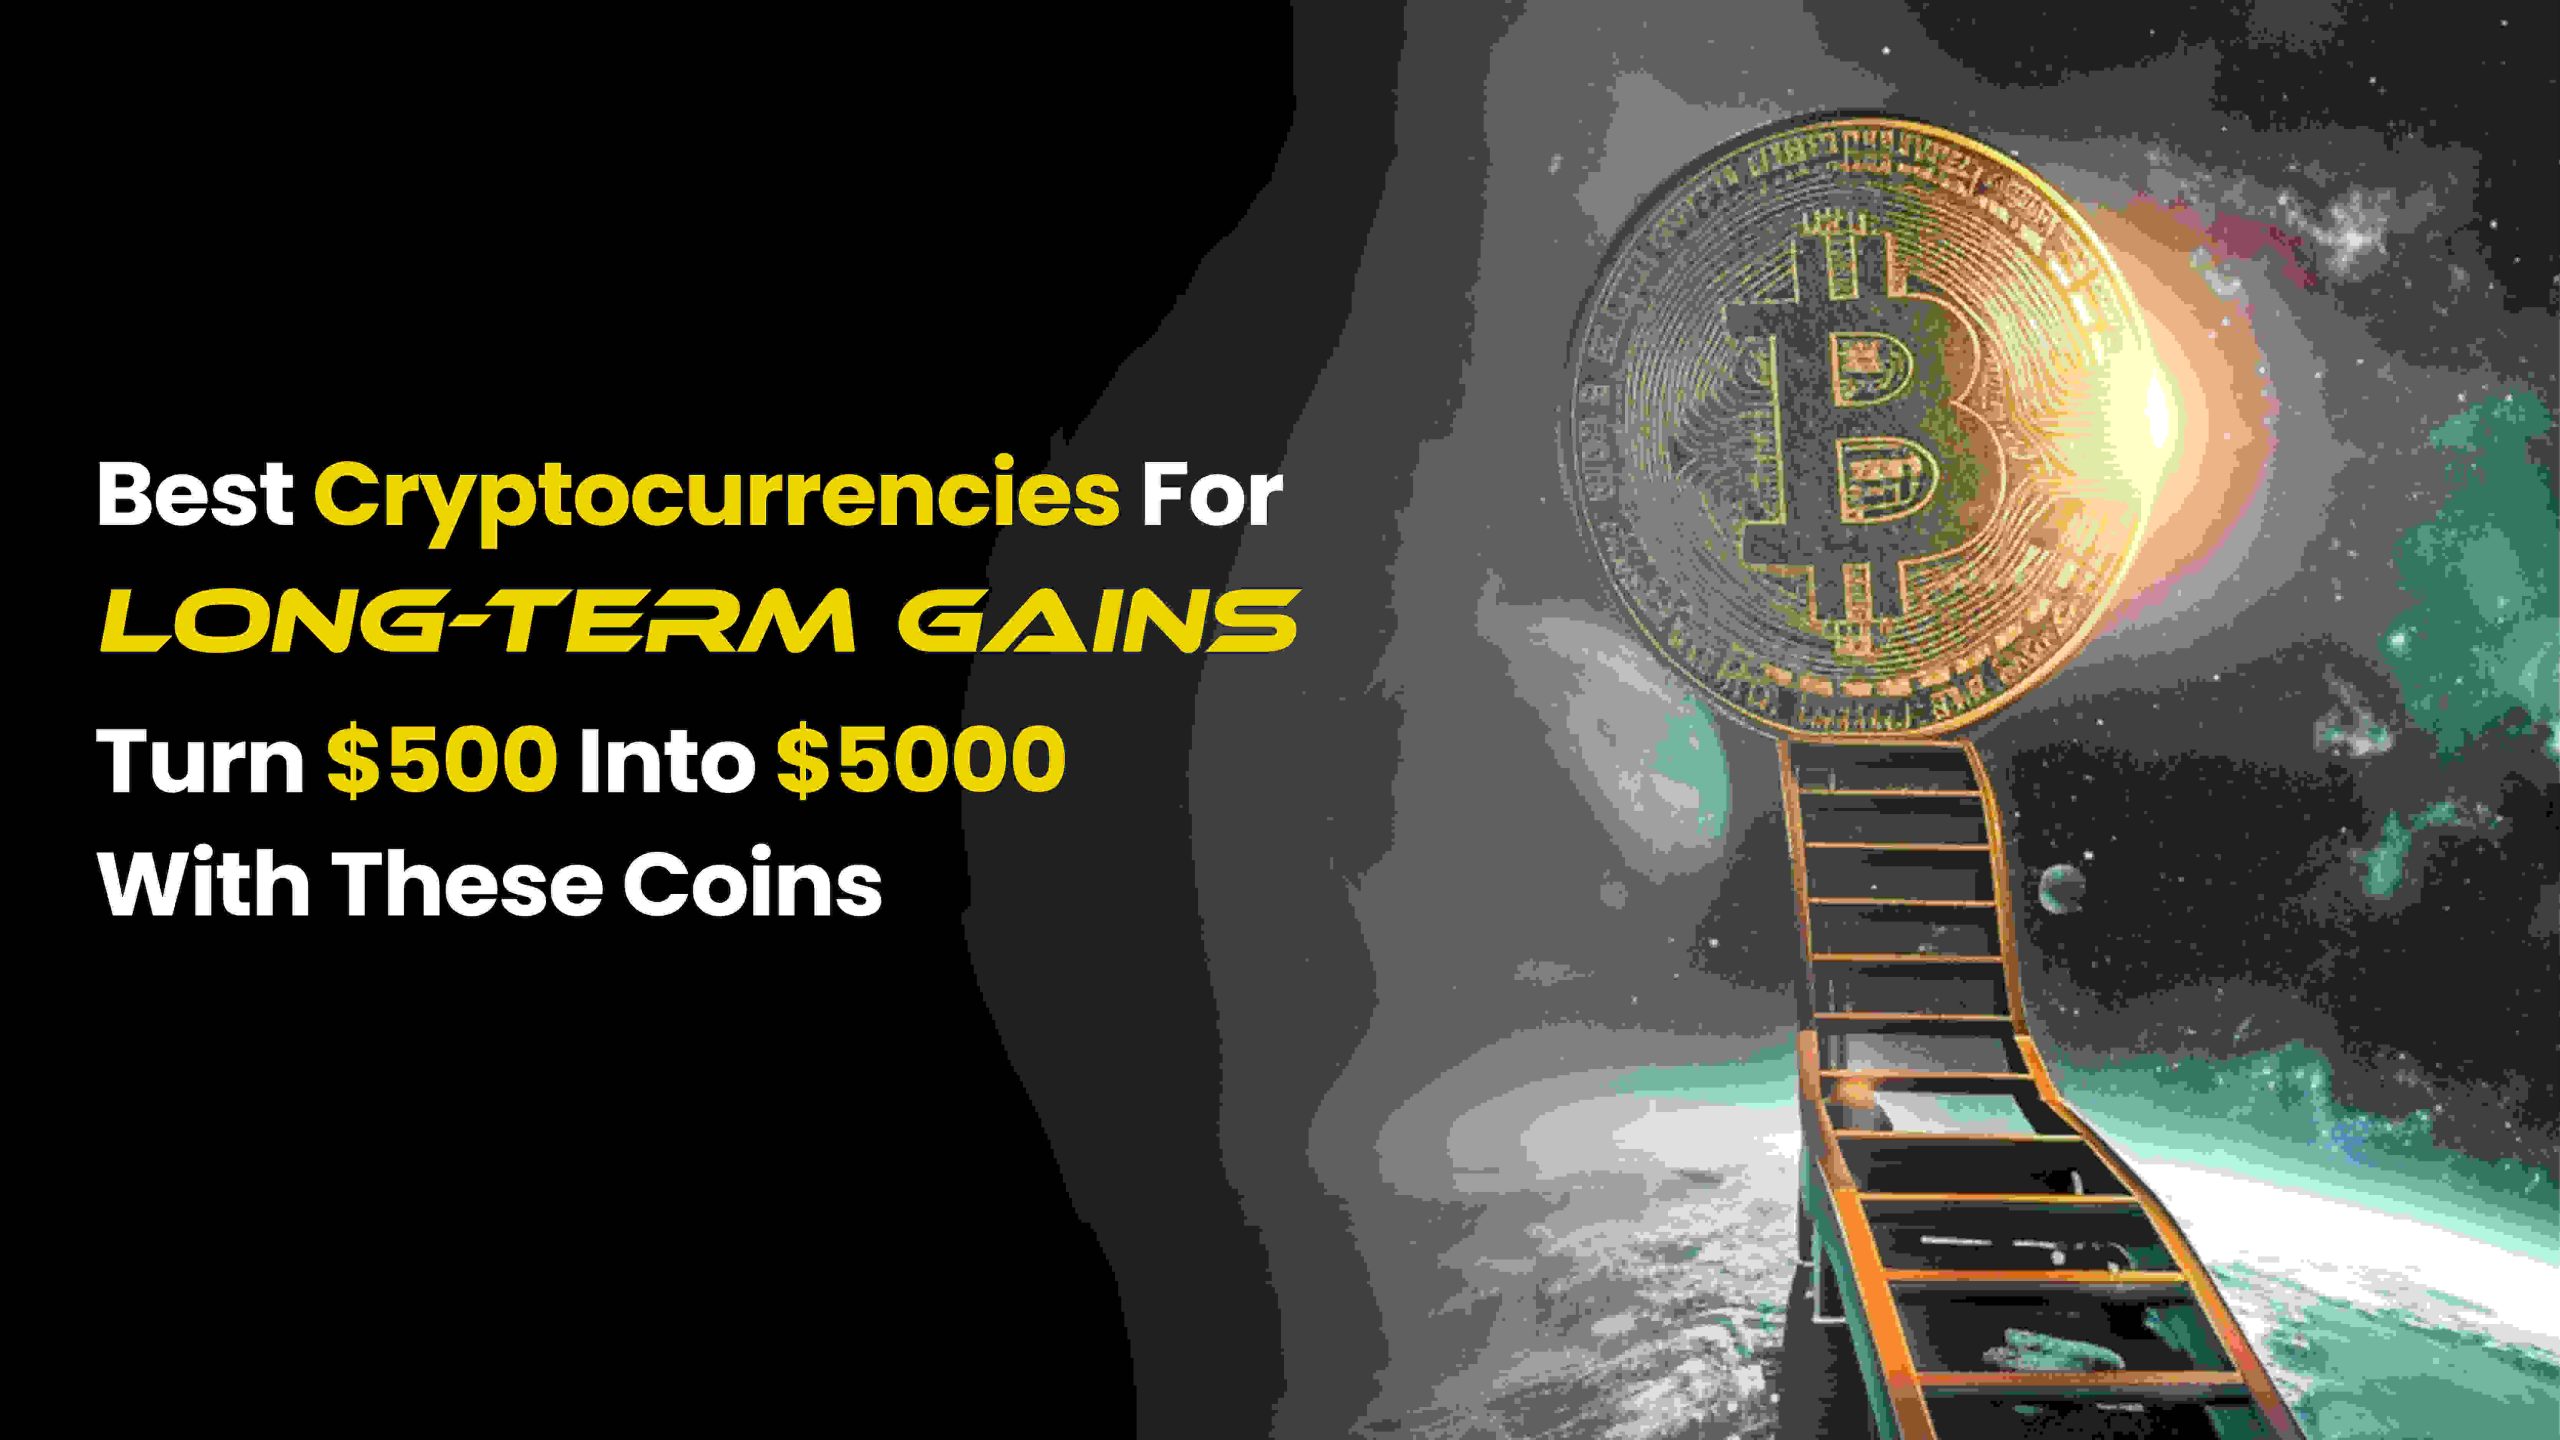 Best Cryptocurrencies for Long-Term Gains: Turn $500 into $5000 with These Coins